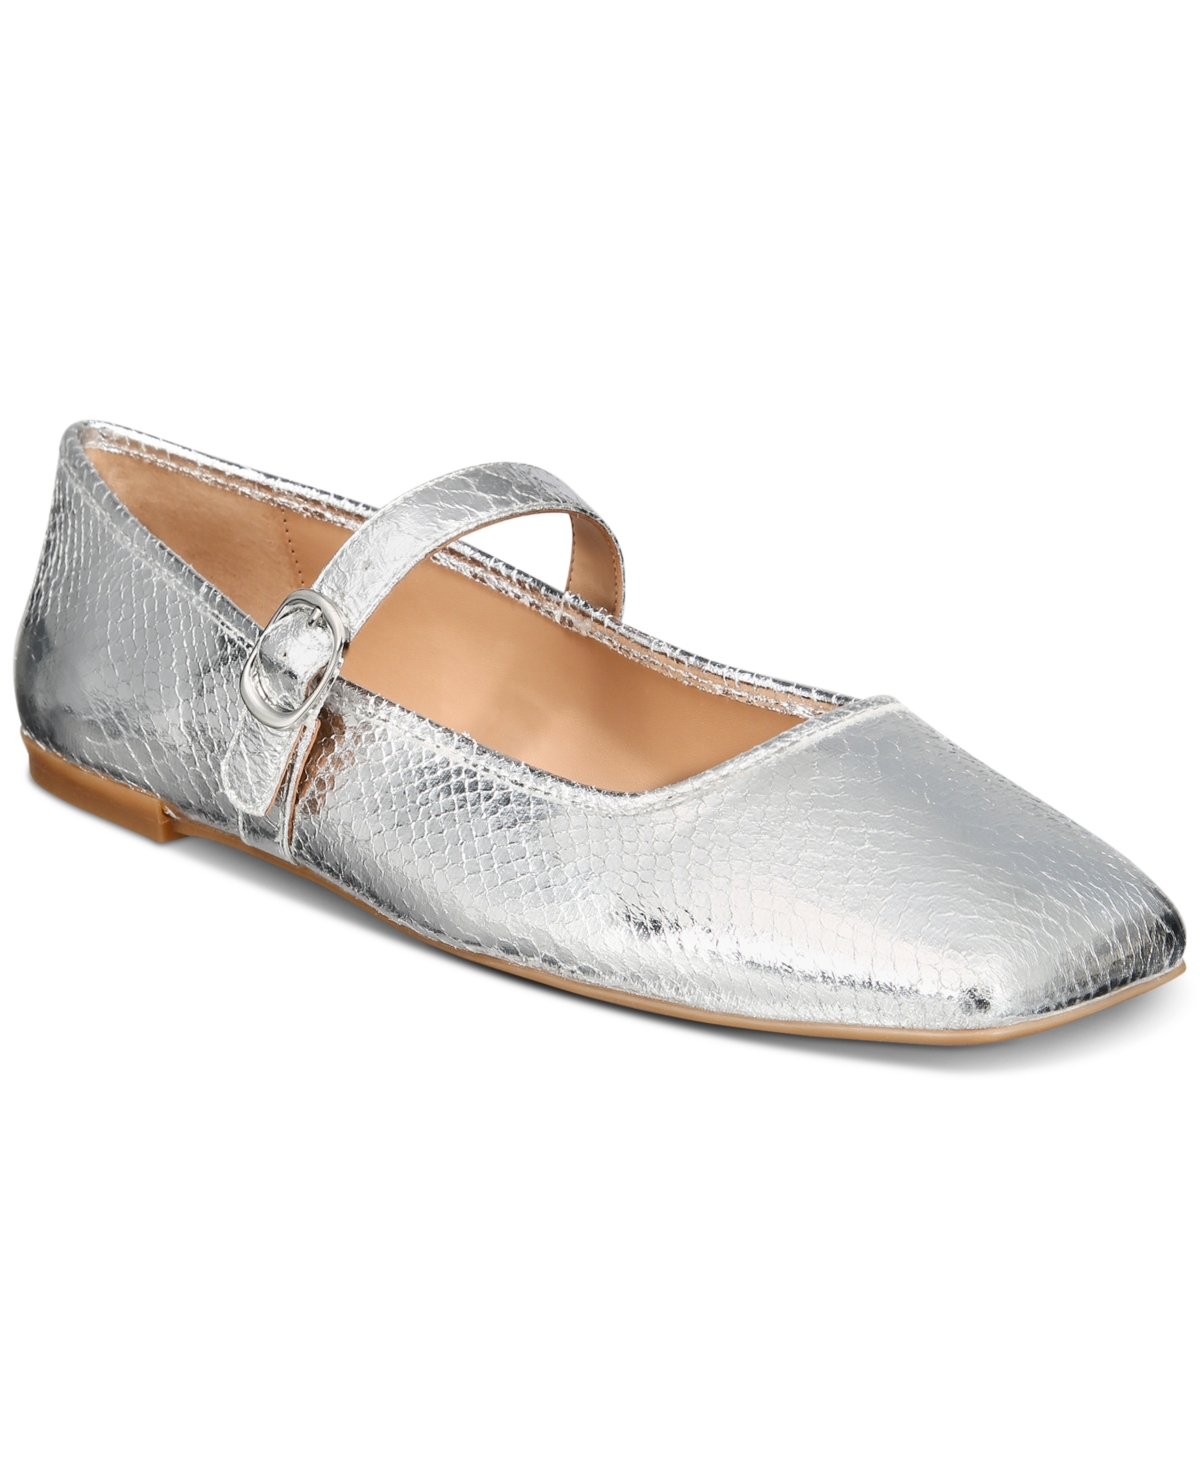 Jadis Square Toe Ballet Flats, Created for Macy's - Silver Snake